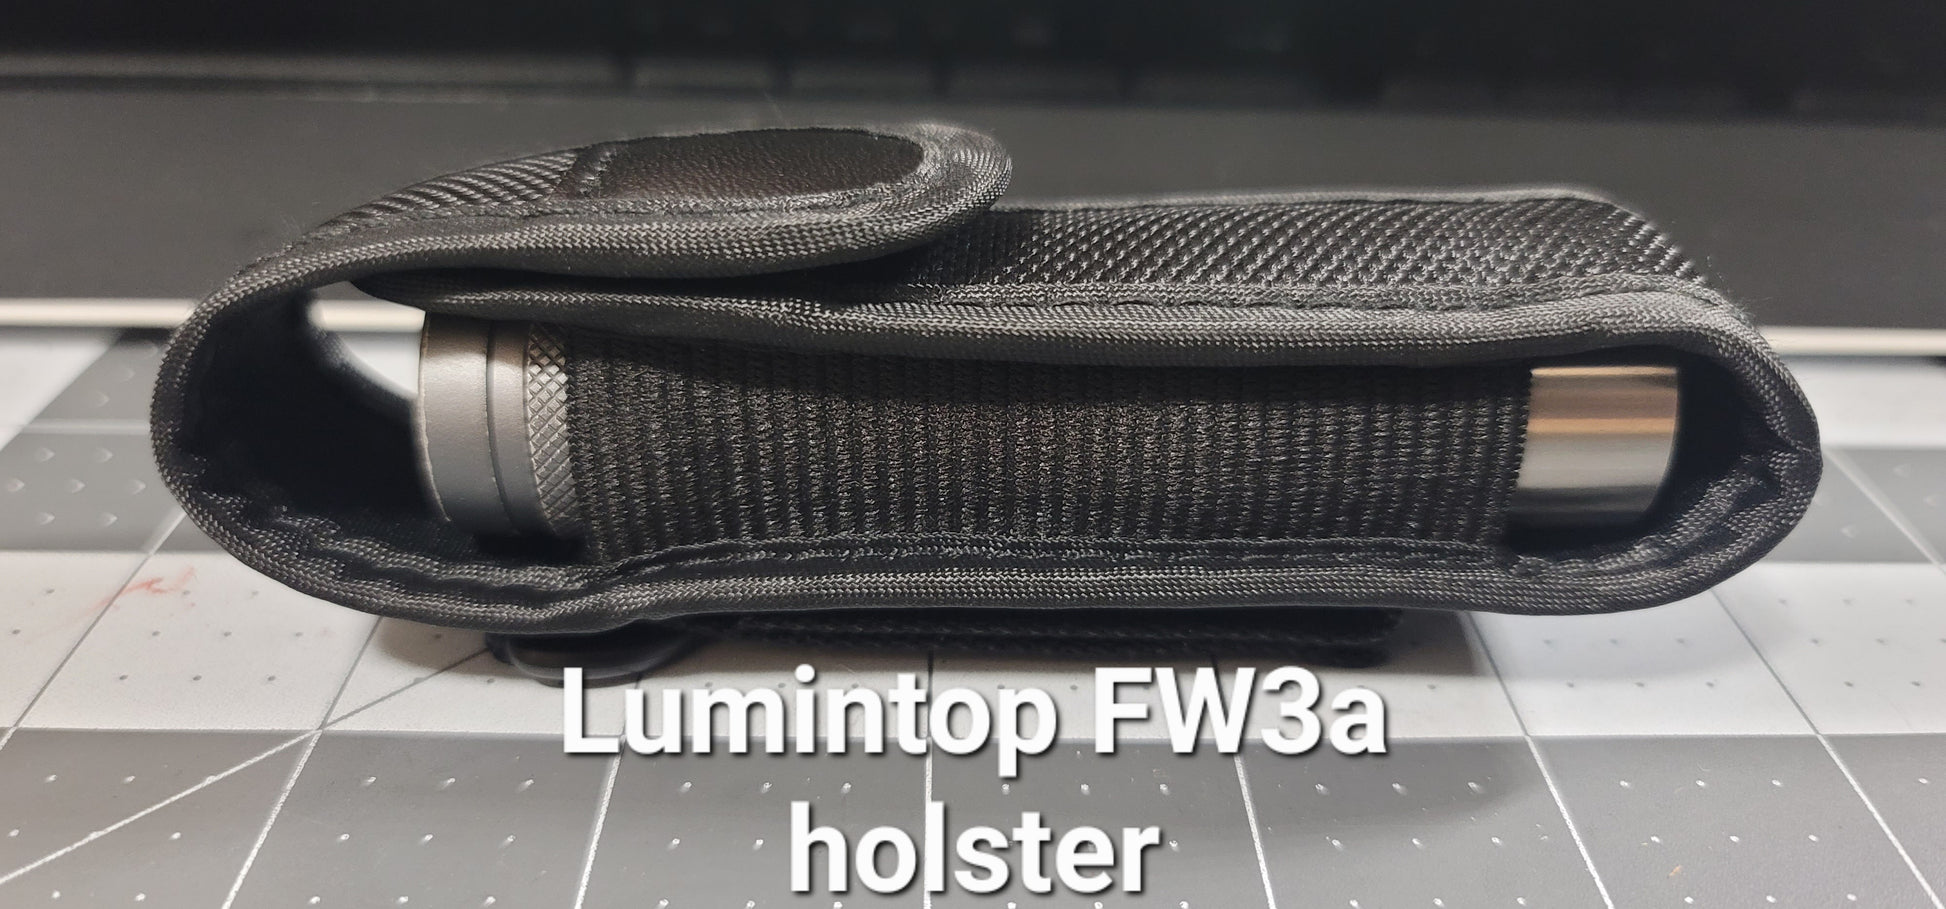 LUMINTOP FW3A, FW1A, FW1A, GT MICRO NYLON HOLSTER NEW USA DIRECT!